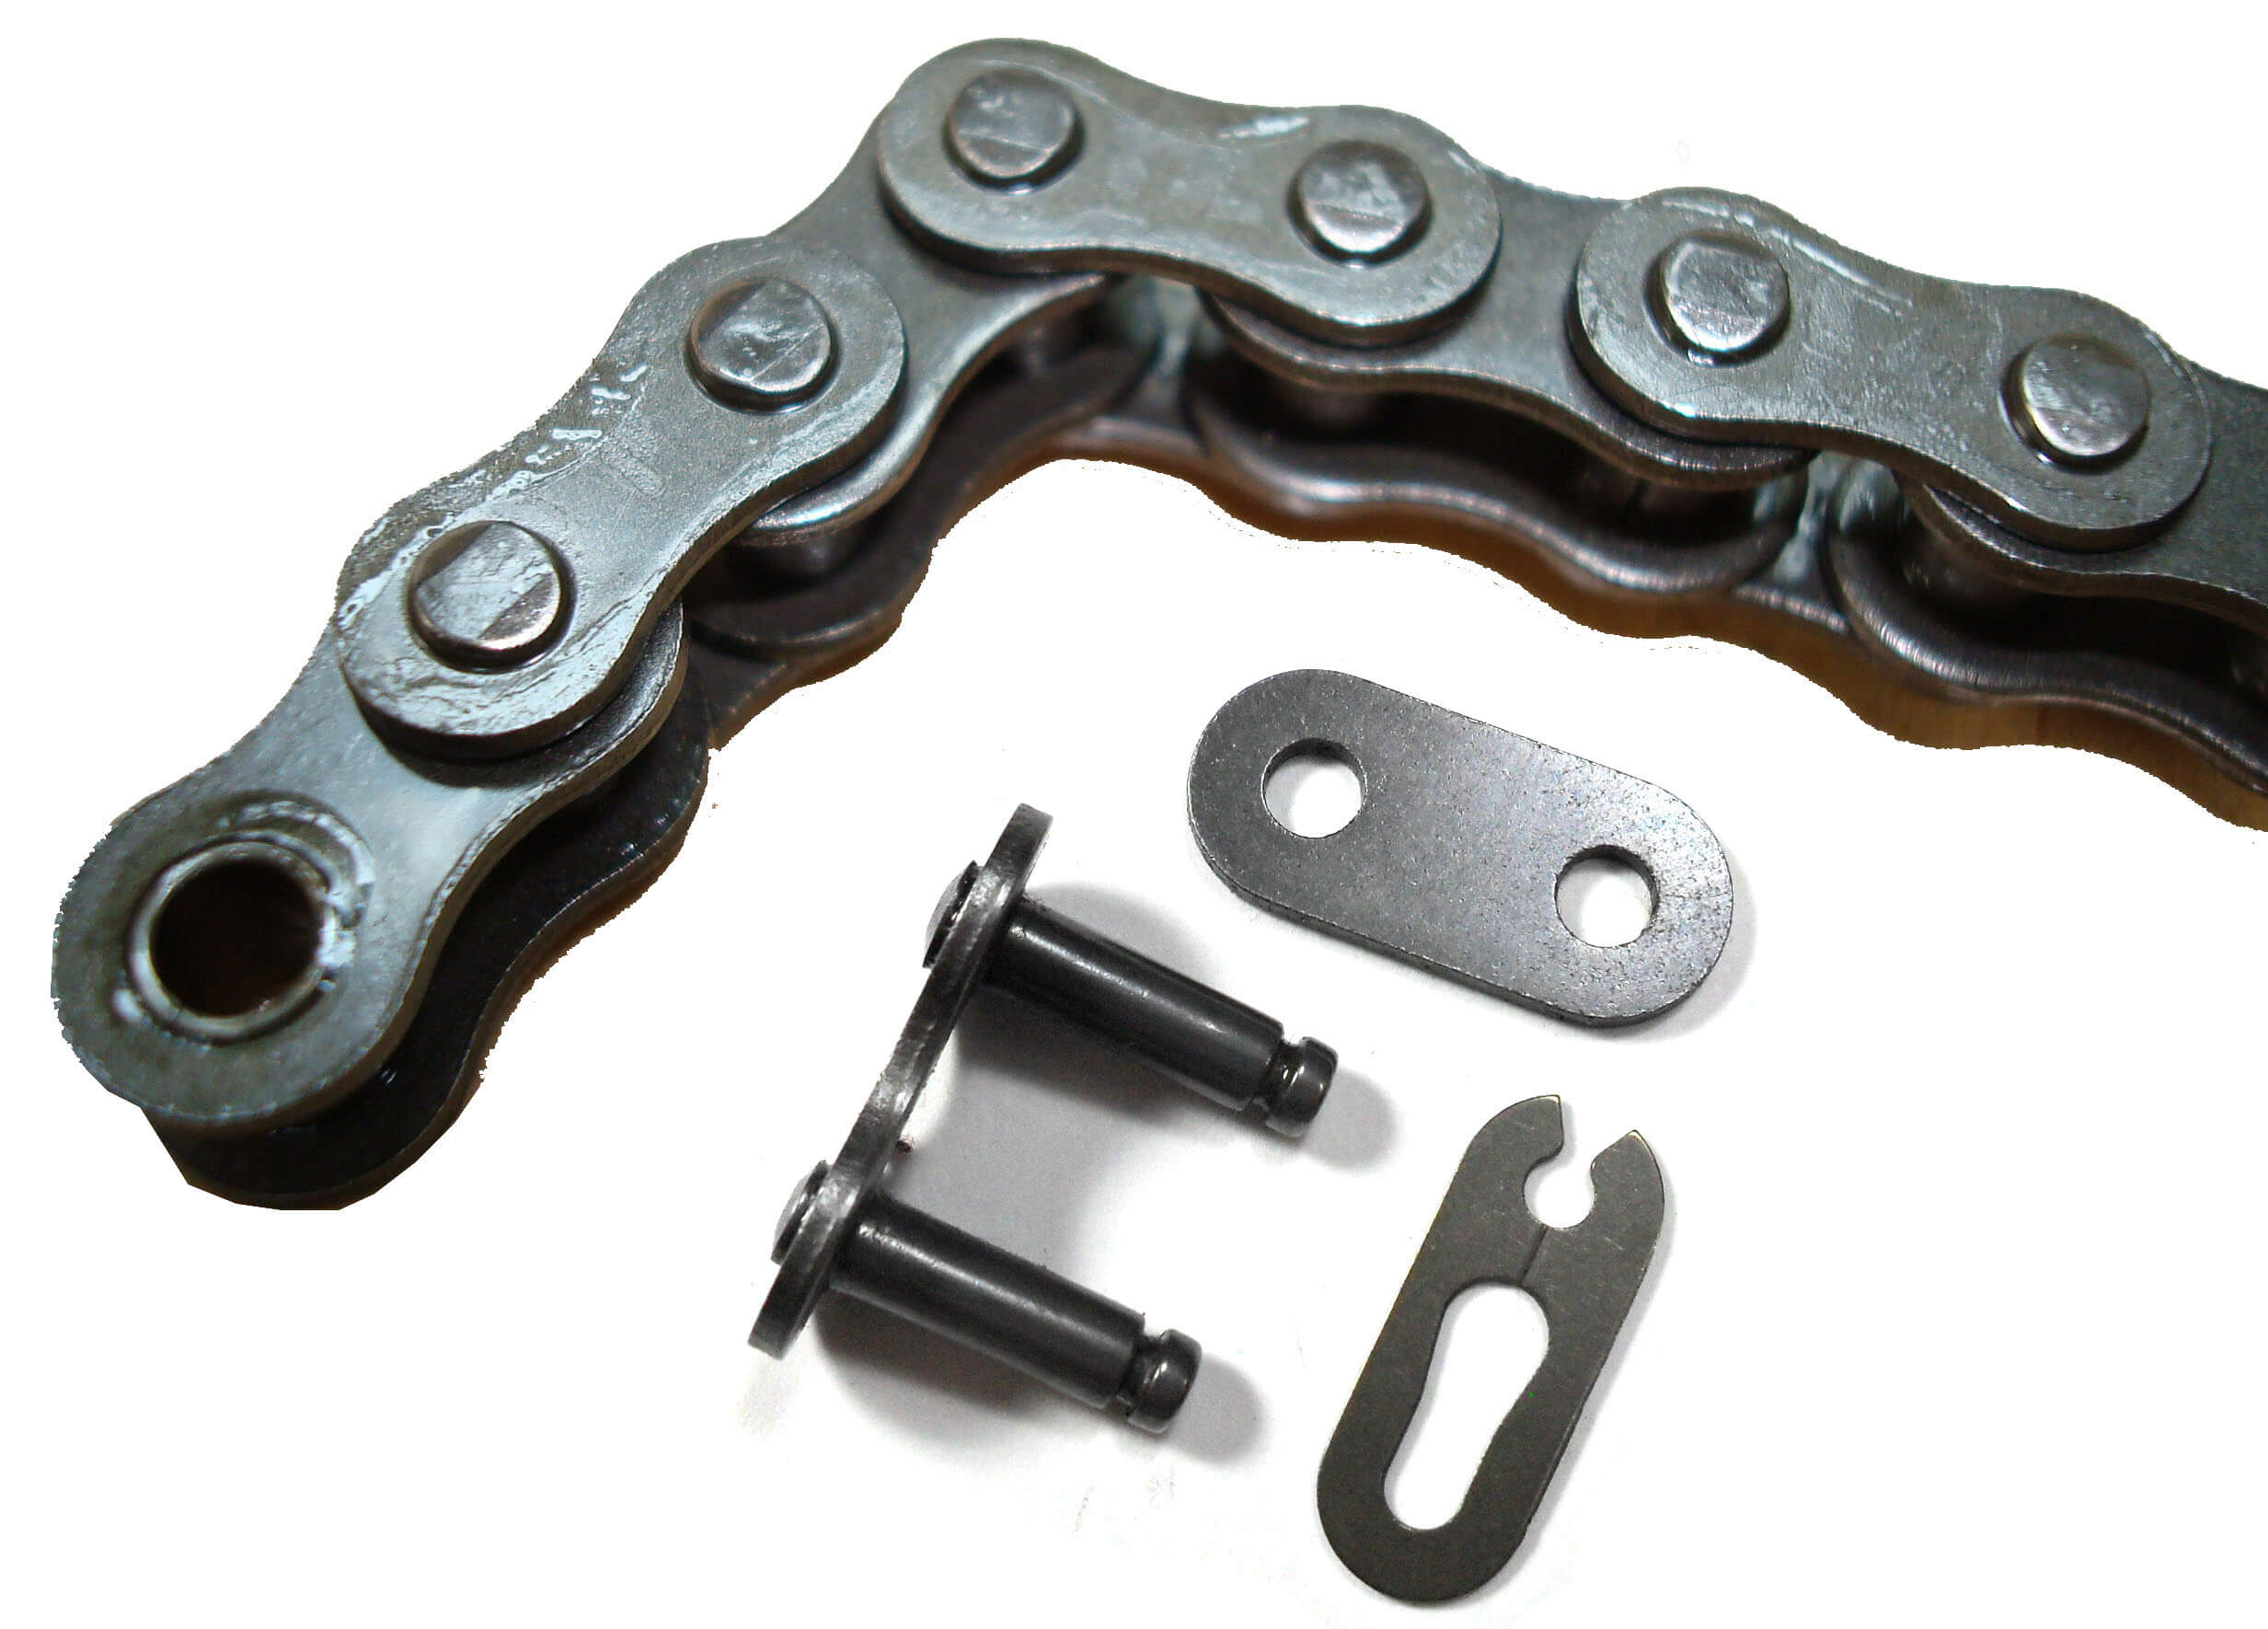 Chain #35 x 80L With Master Link Fits Coleman CK100, GK80, Motovox, + other small GoKarts-Mini Bikes